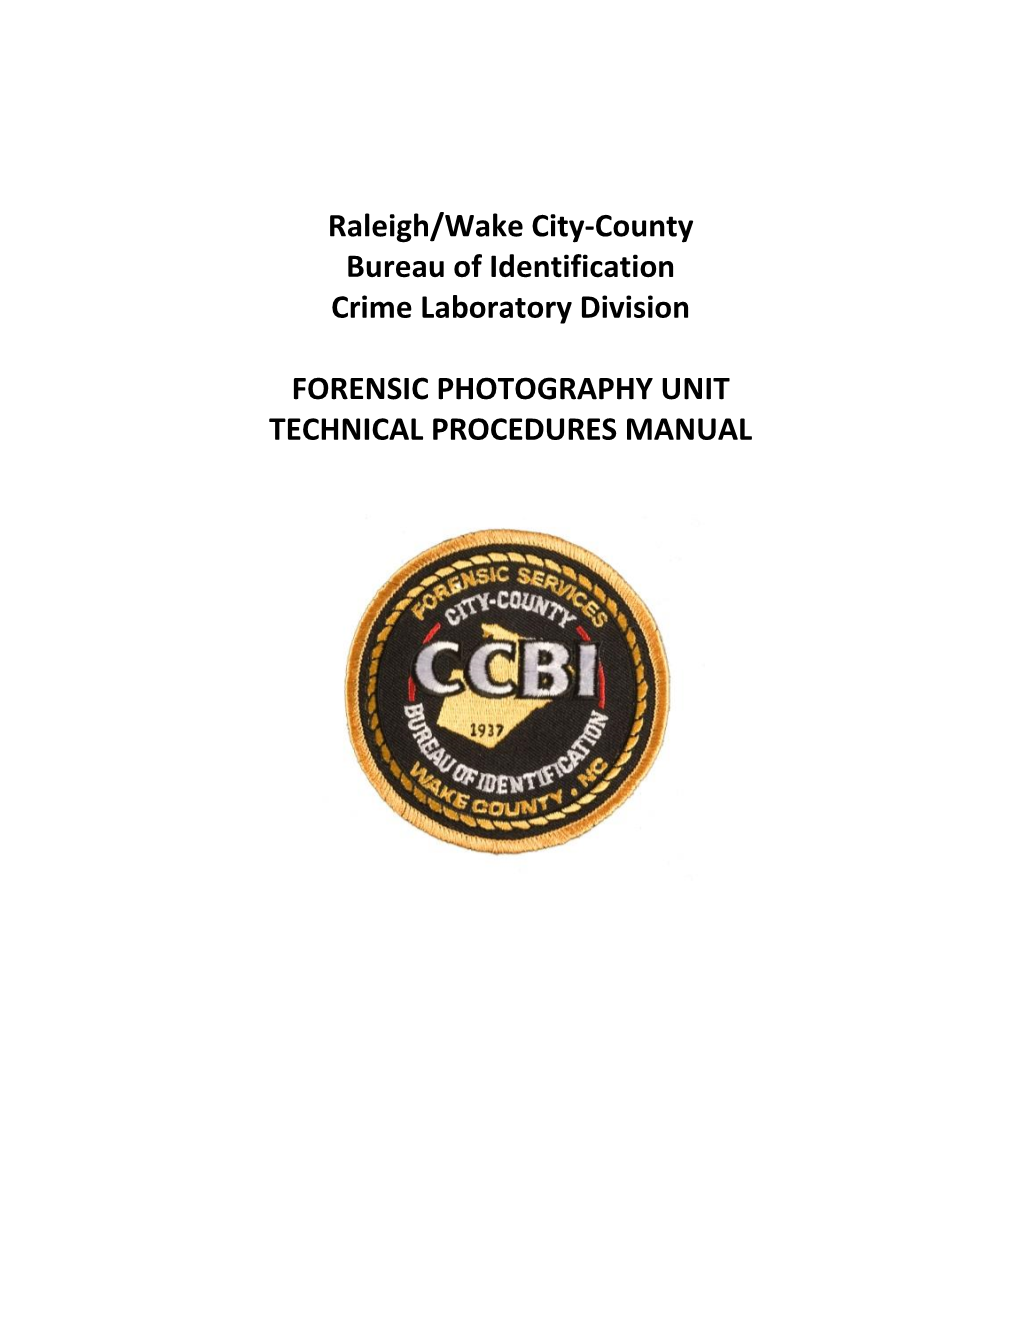 Forensic Photography Unit Technical Procedures Manual